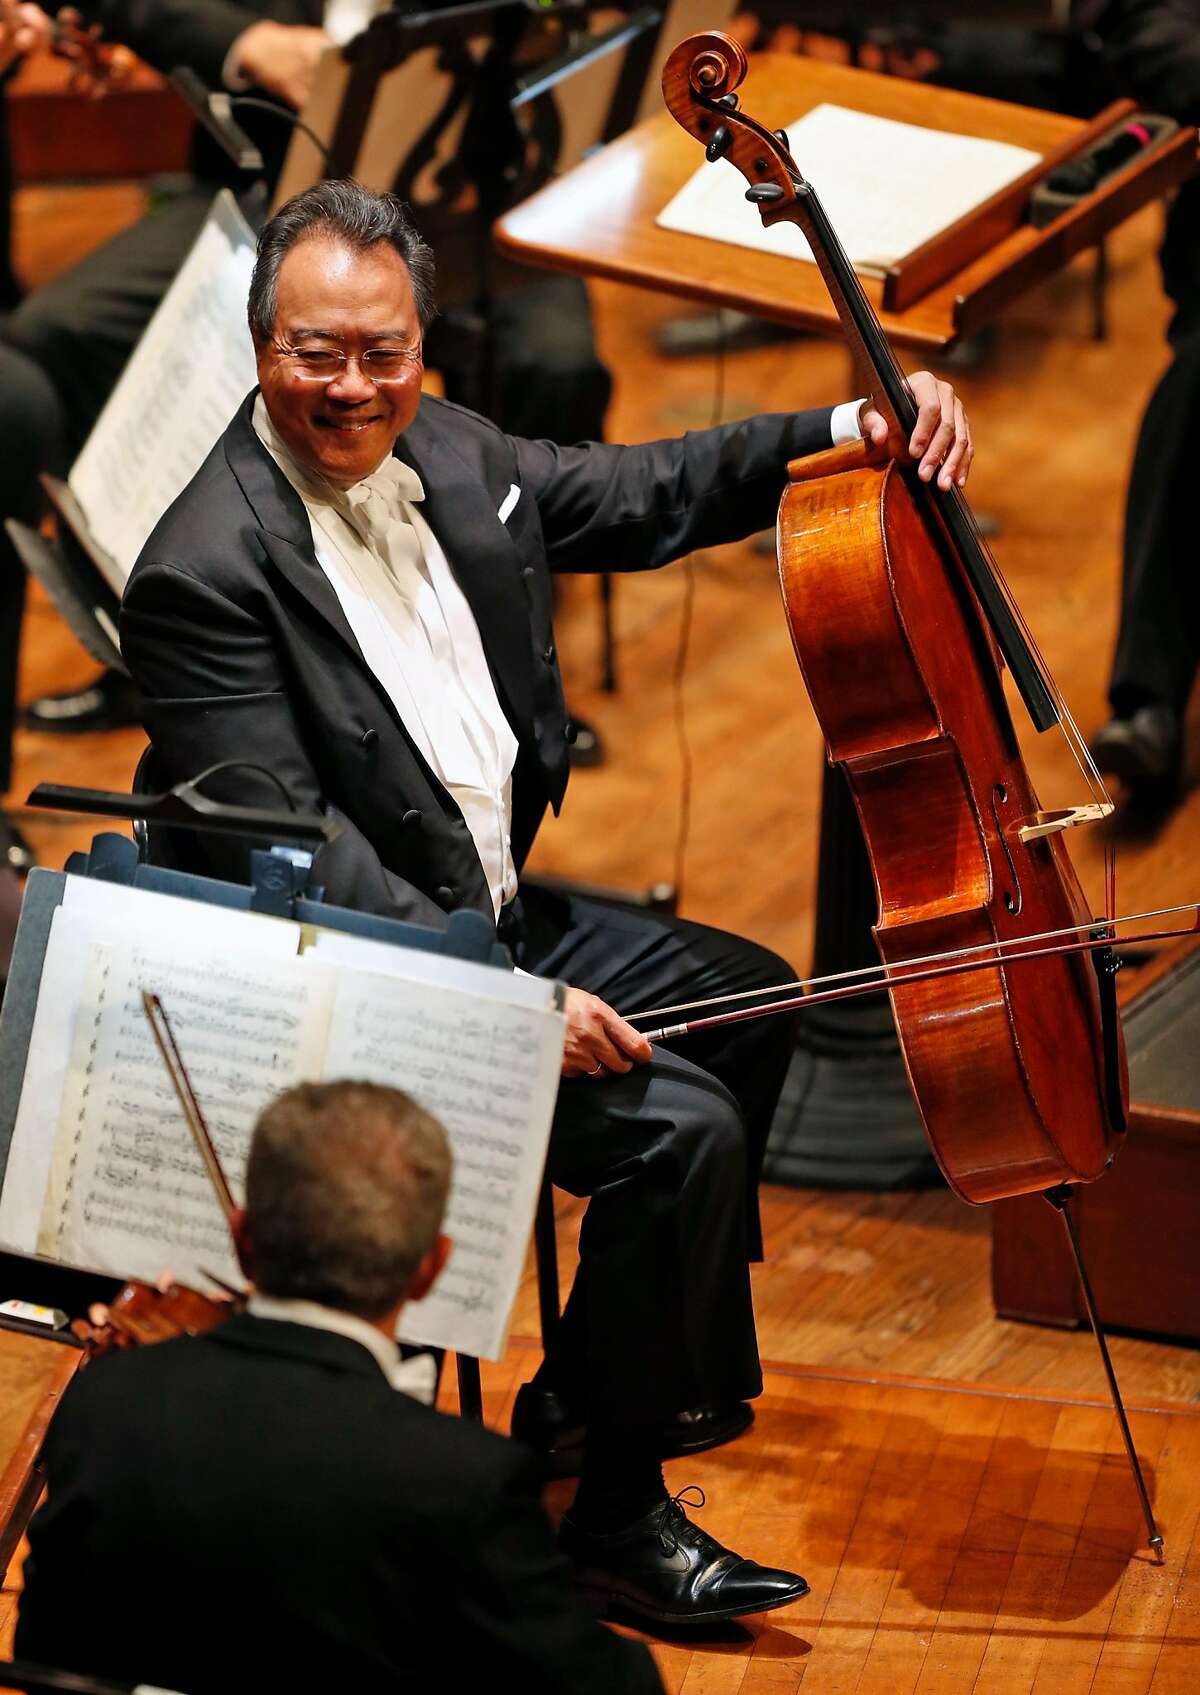 "My most embarrassing moment on-air was during a live broadcast when I introduced world-renowned cellist Yo-Yo Ma as 'Yo-Yo Mama.' Thank goodness social media wasn’t around then." Read more.